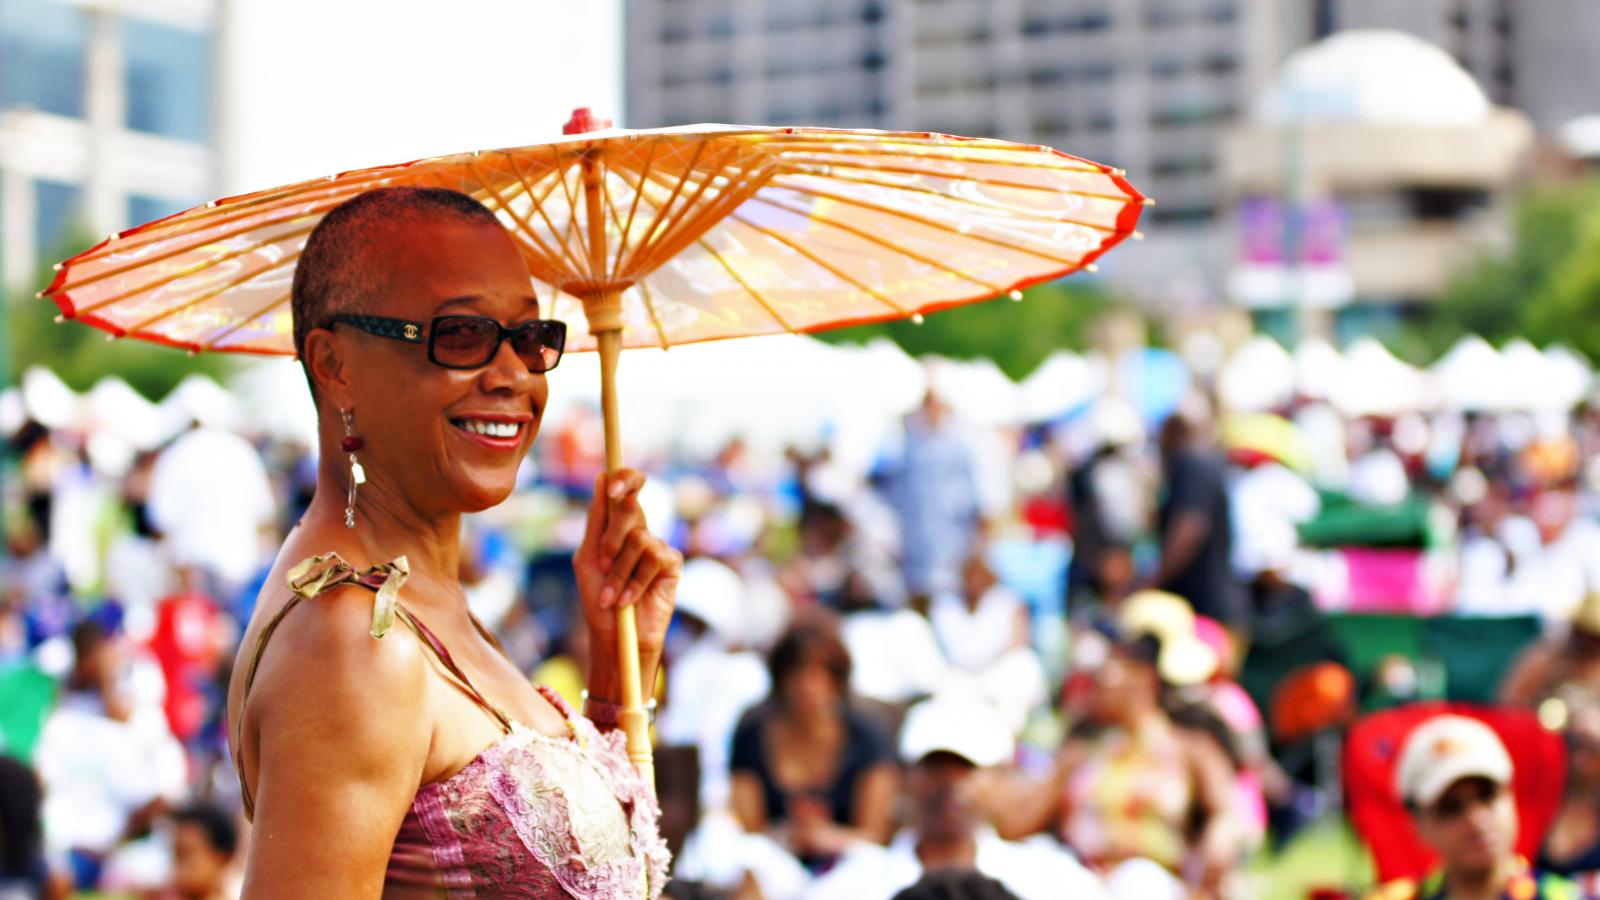 Woman standing outdoors at a festival holding a decorative umbrella.